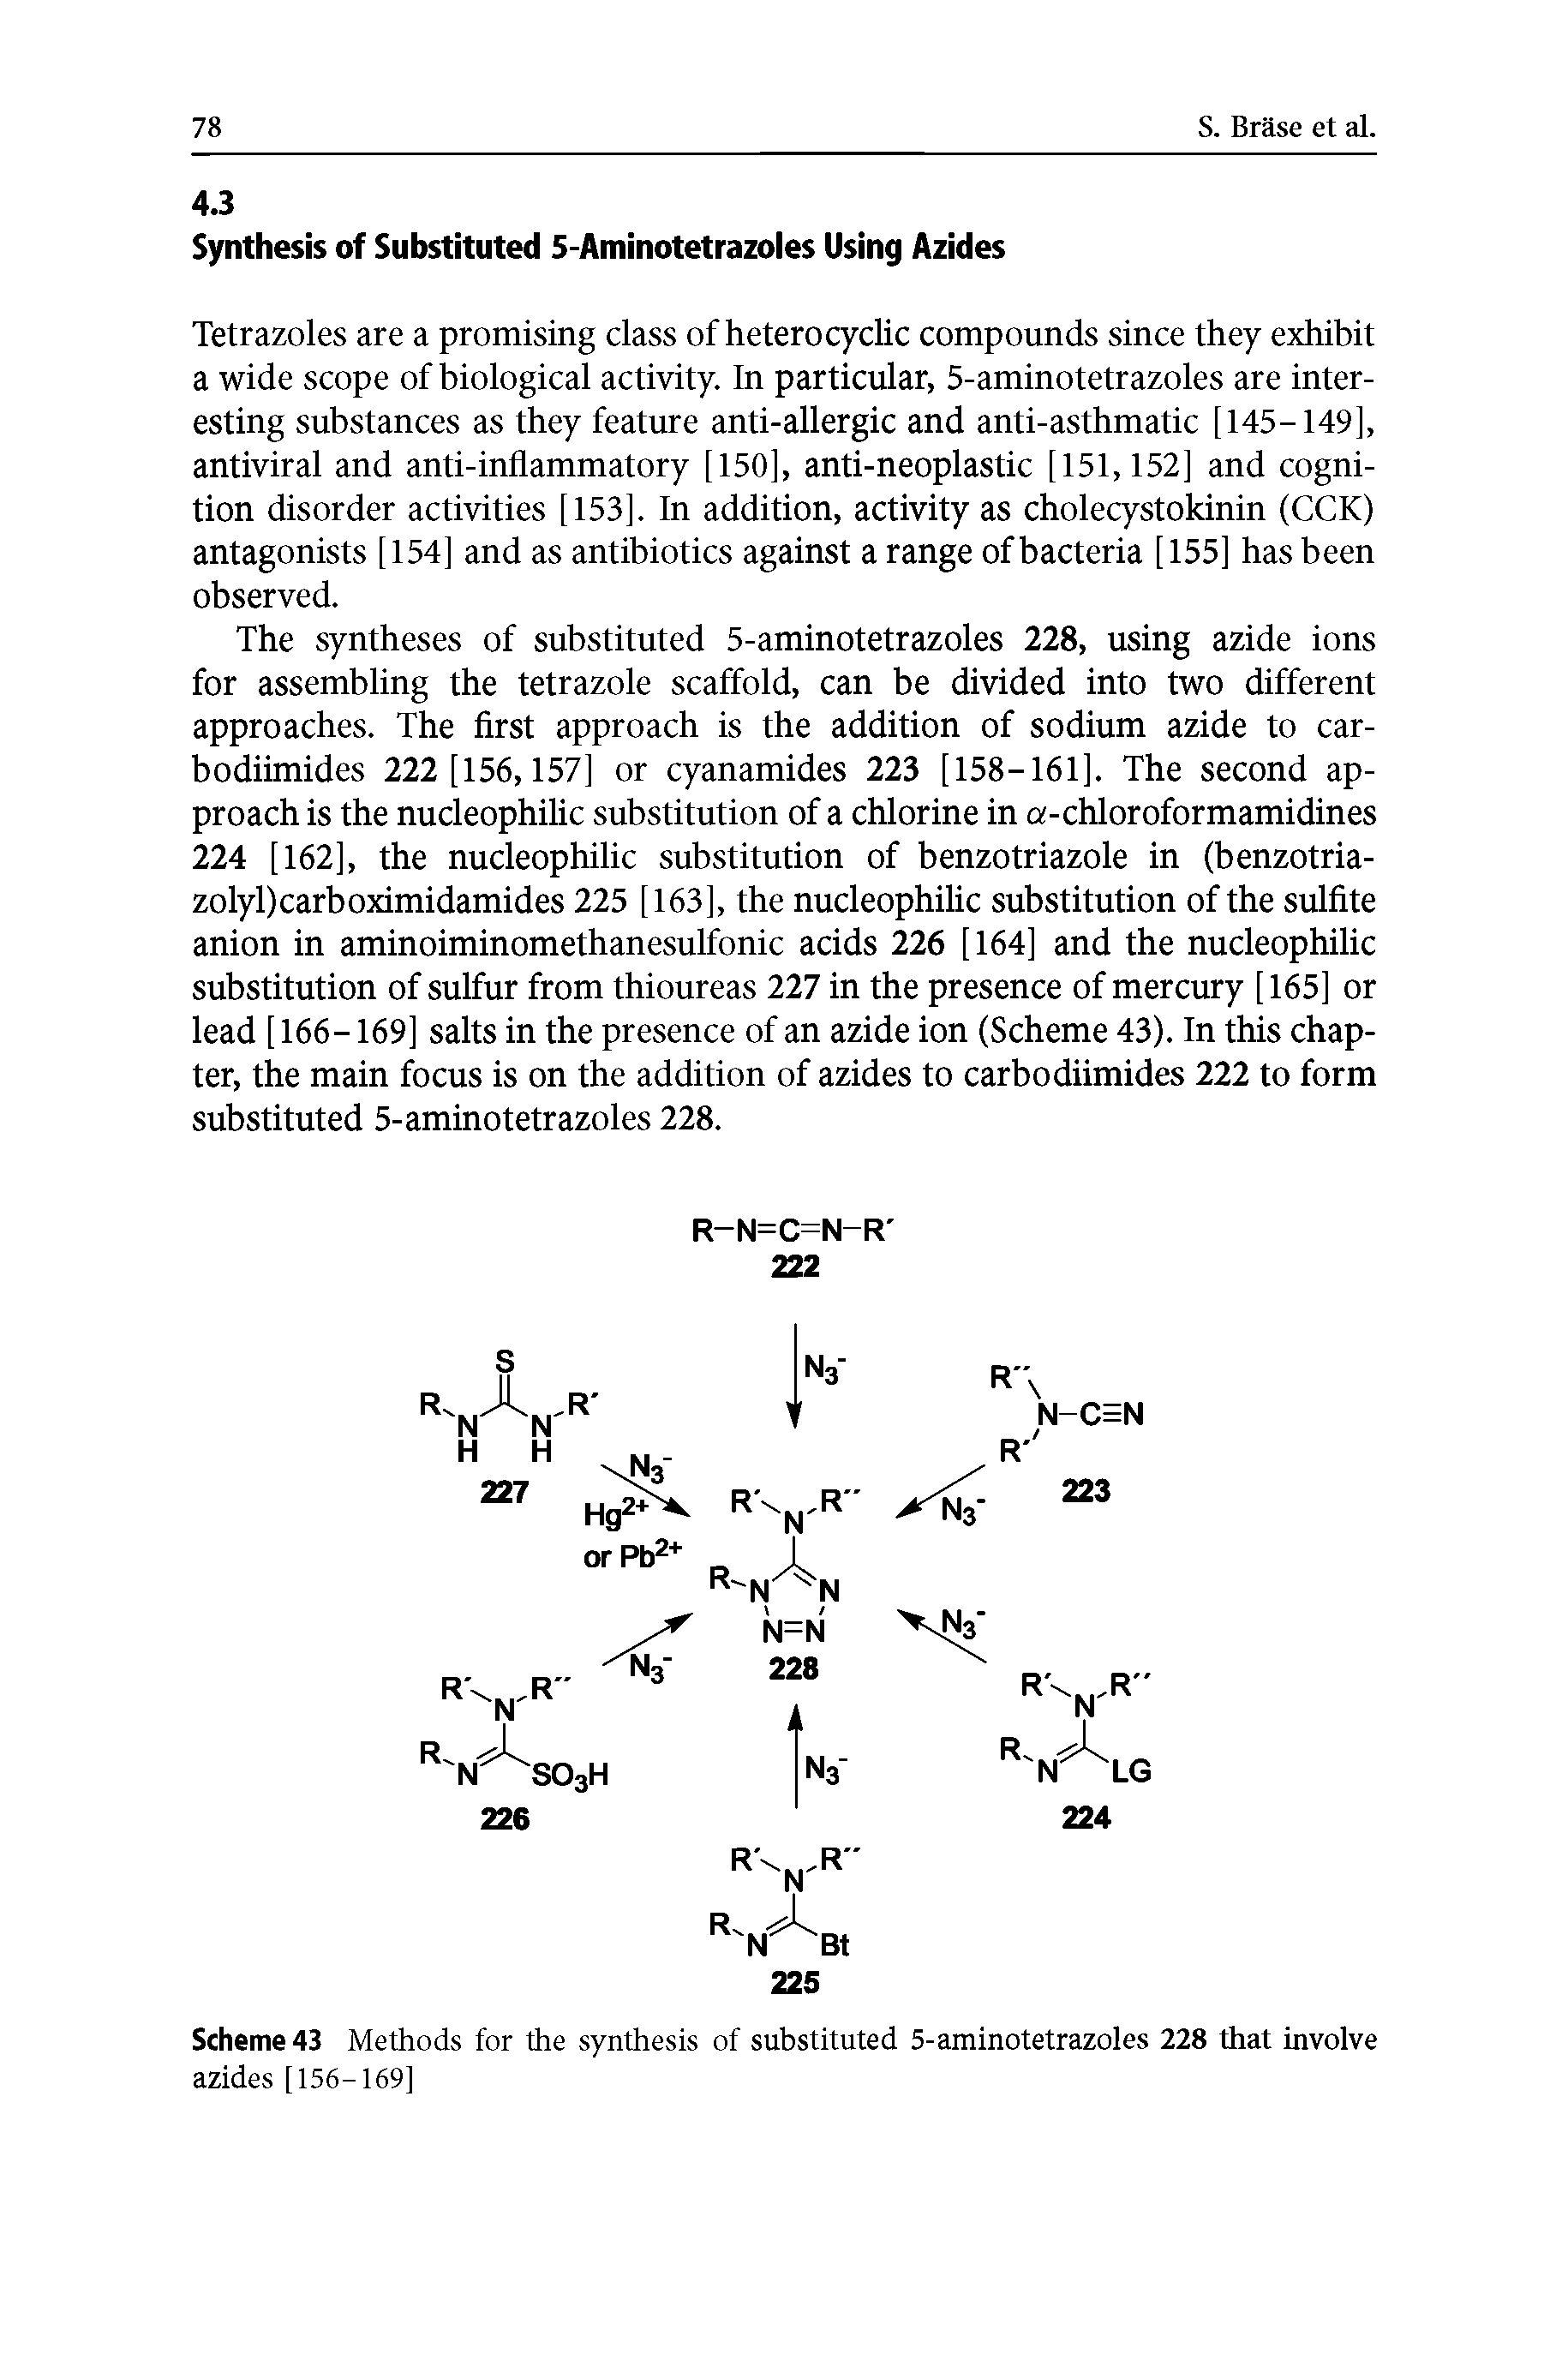 Scheme 43 Methods for the synthesis of substituted 5-aminotetrazoles 228 that involve azides [156-169]...